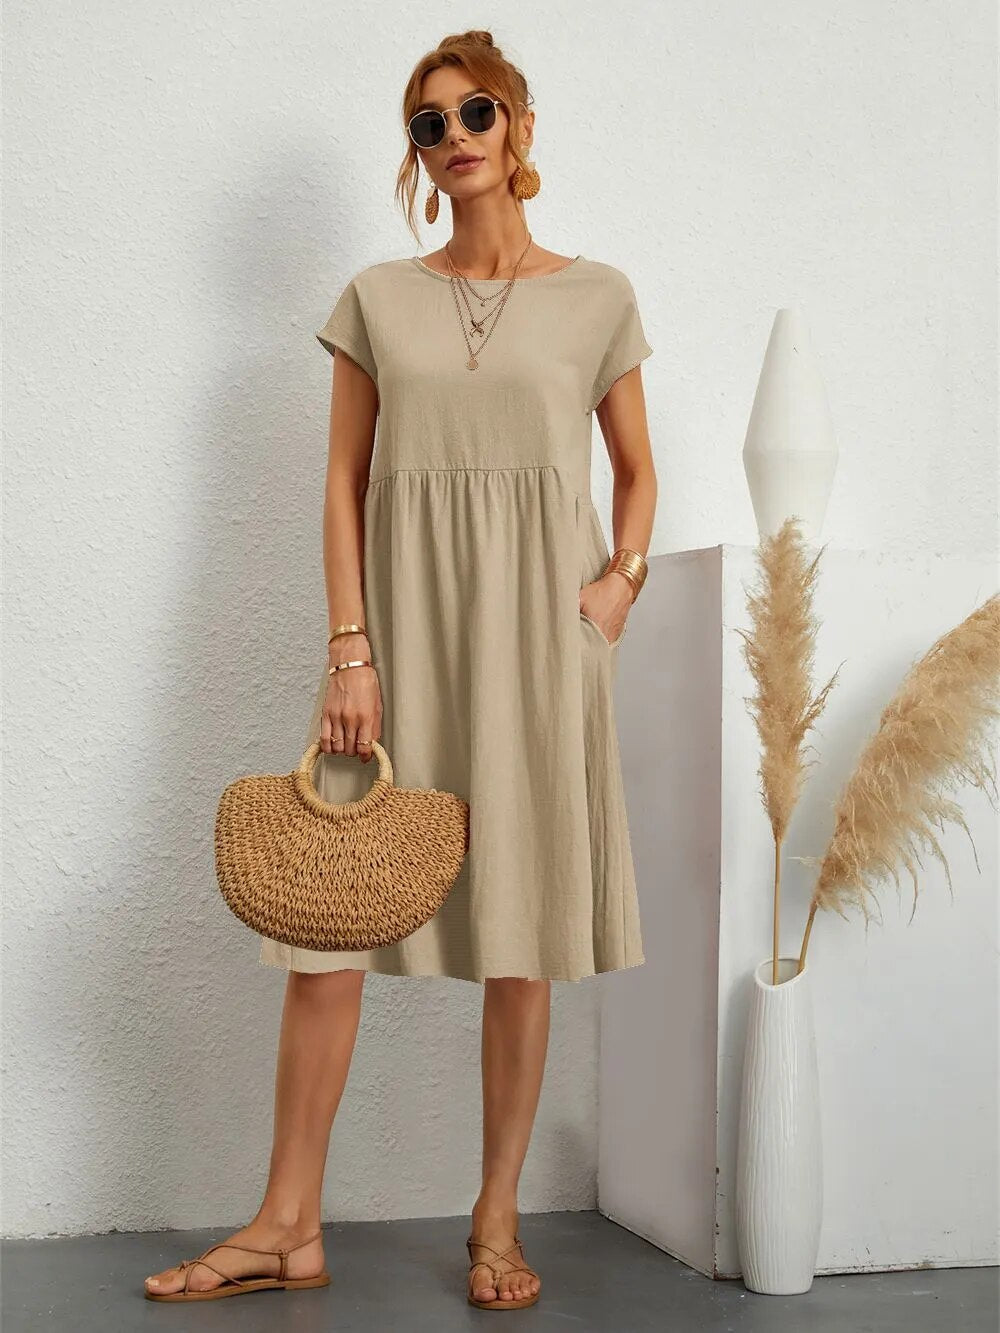 OLIVIA - O-NECK CASUAL SUMMER DRESS WITH LOOSE FIT